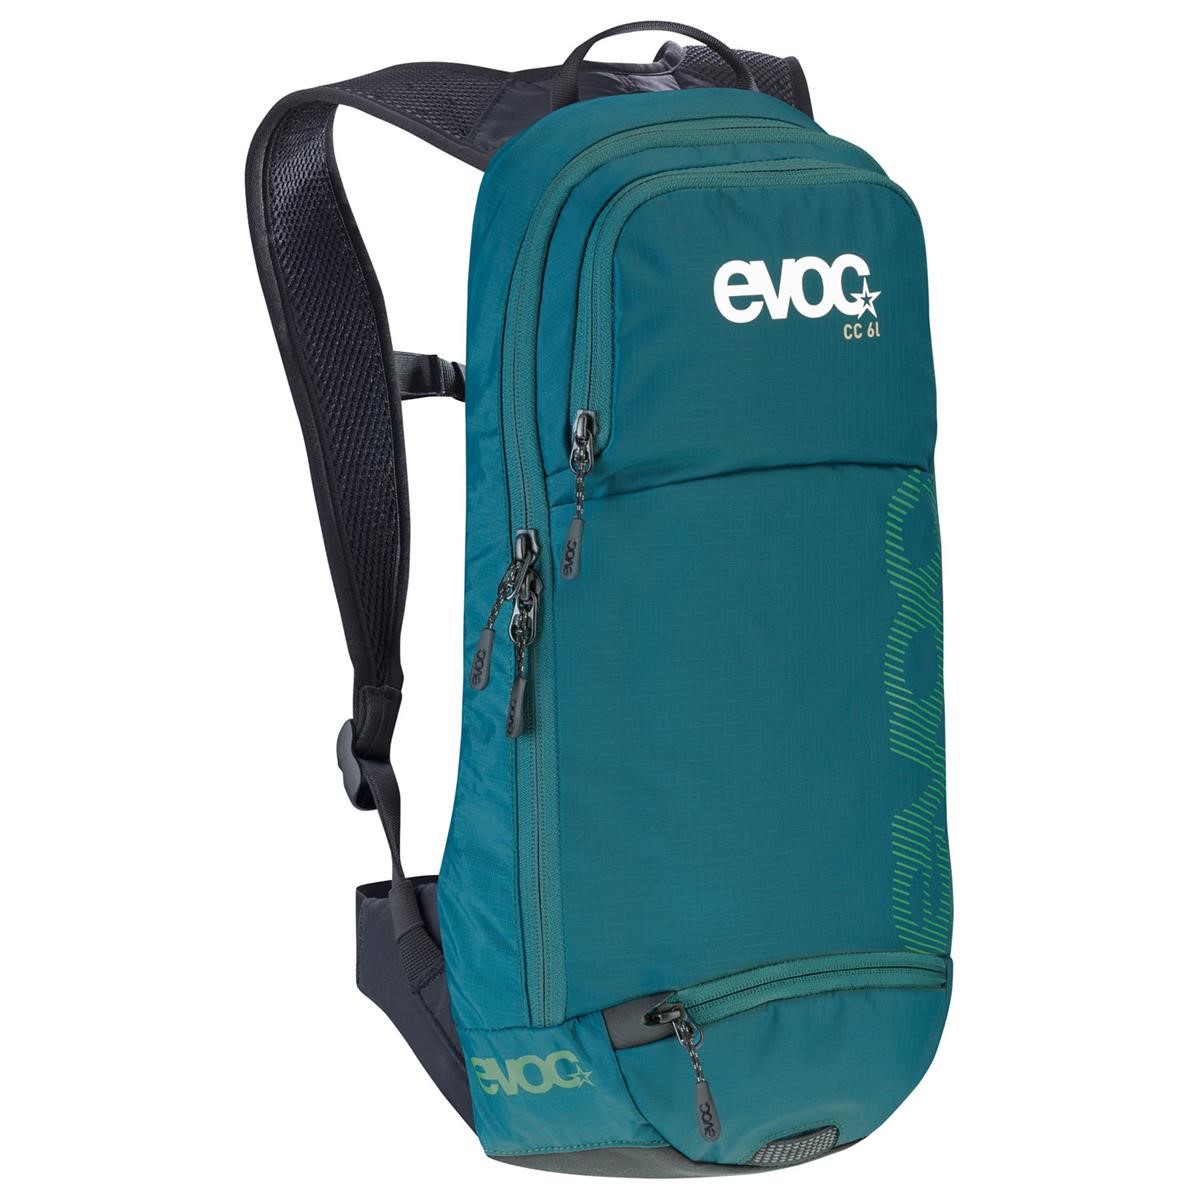 Evoc Backpack with Hydration System Cross Country Petrol, 6 Liter